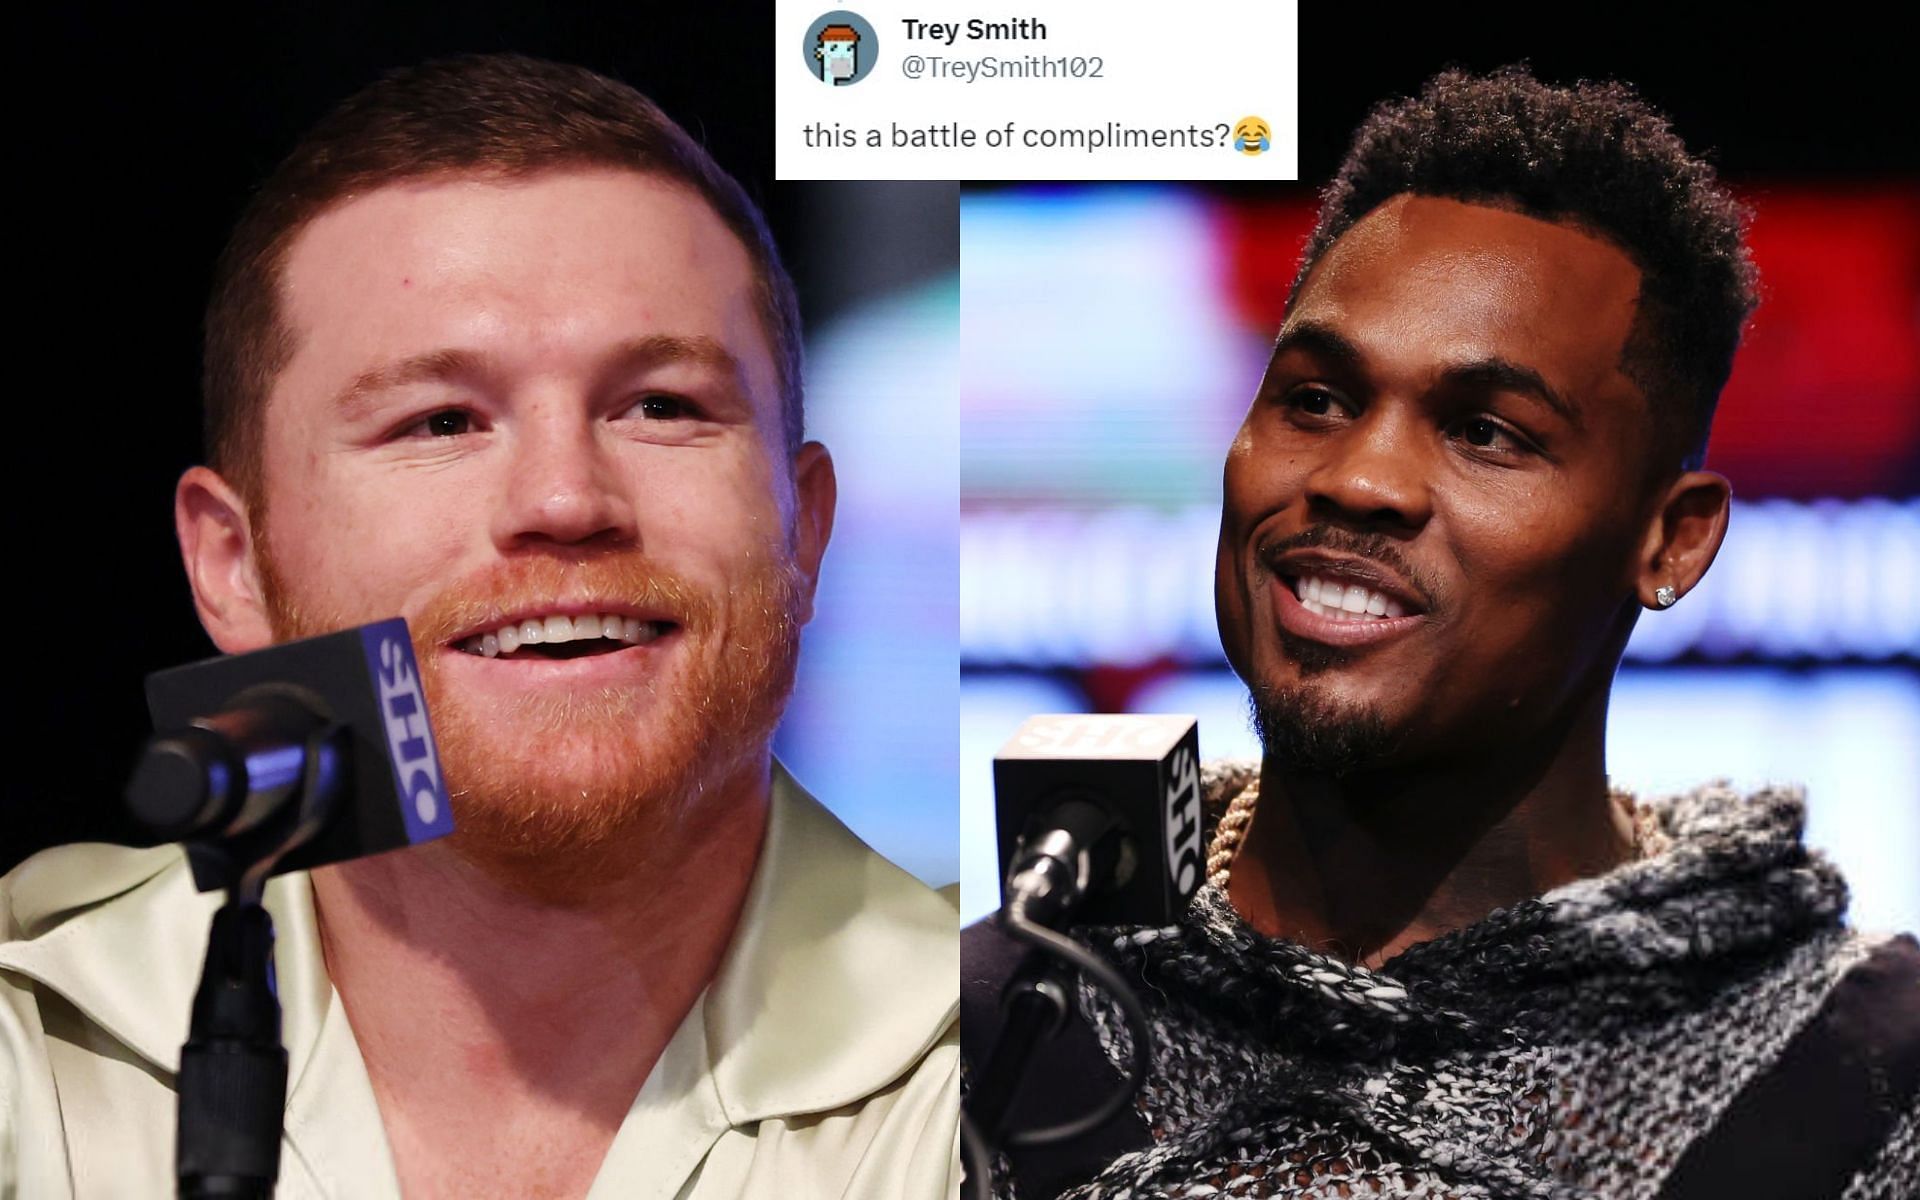 Canelo Alvarez (left) and Jermell Charlo (right) [Images Courtesy: @GettyImages]